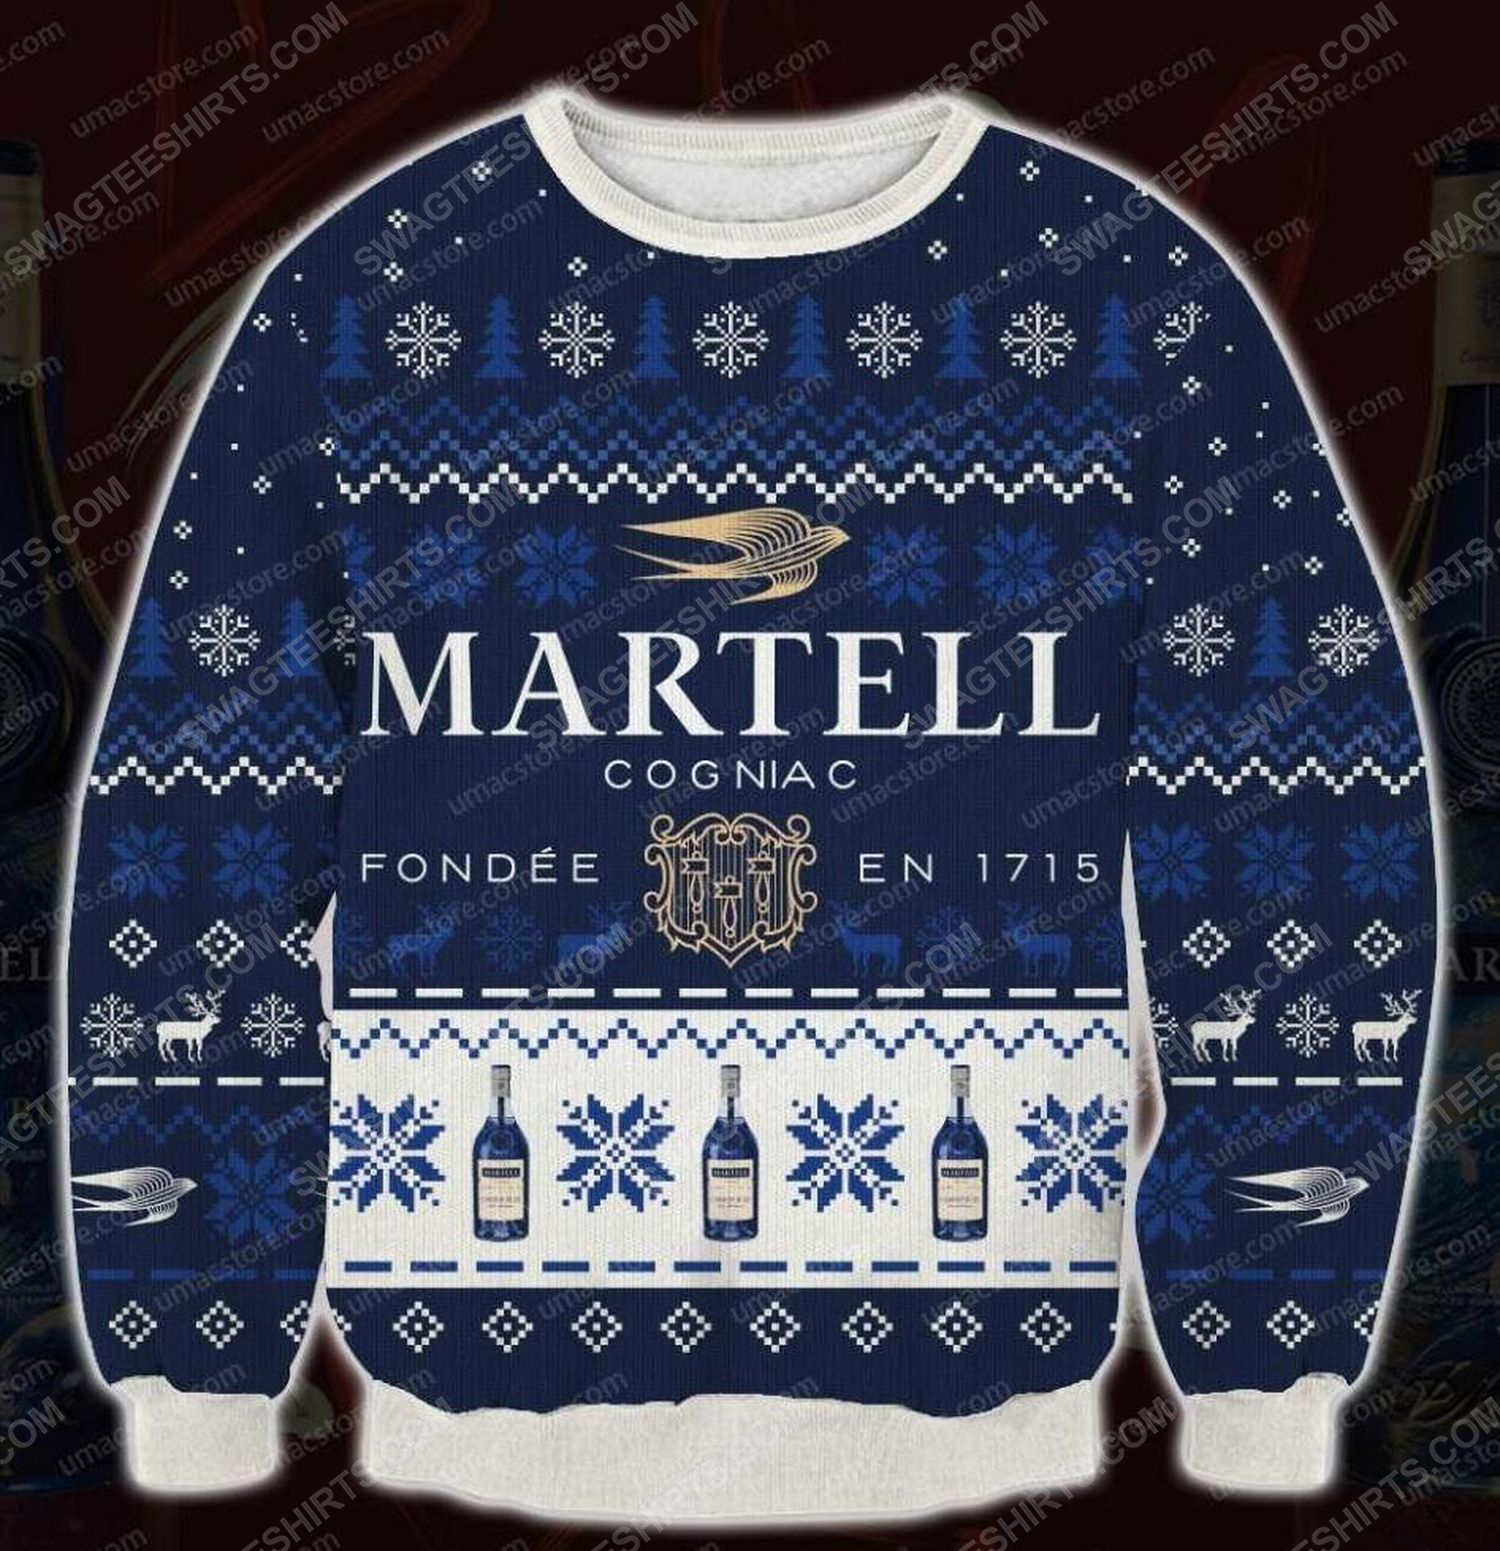 [special edition] Martell cognac fondee en 1715 ugly christmas sweater – maria